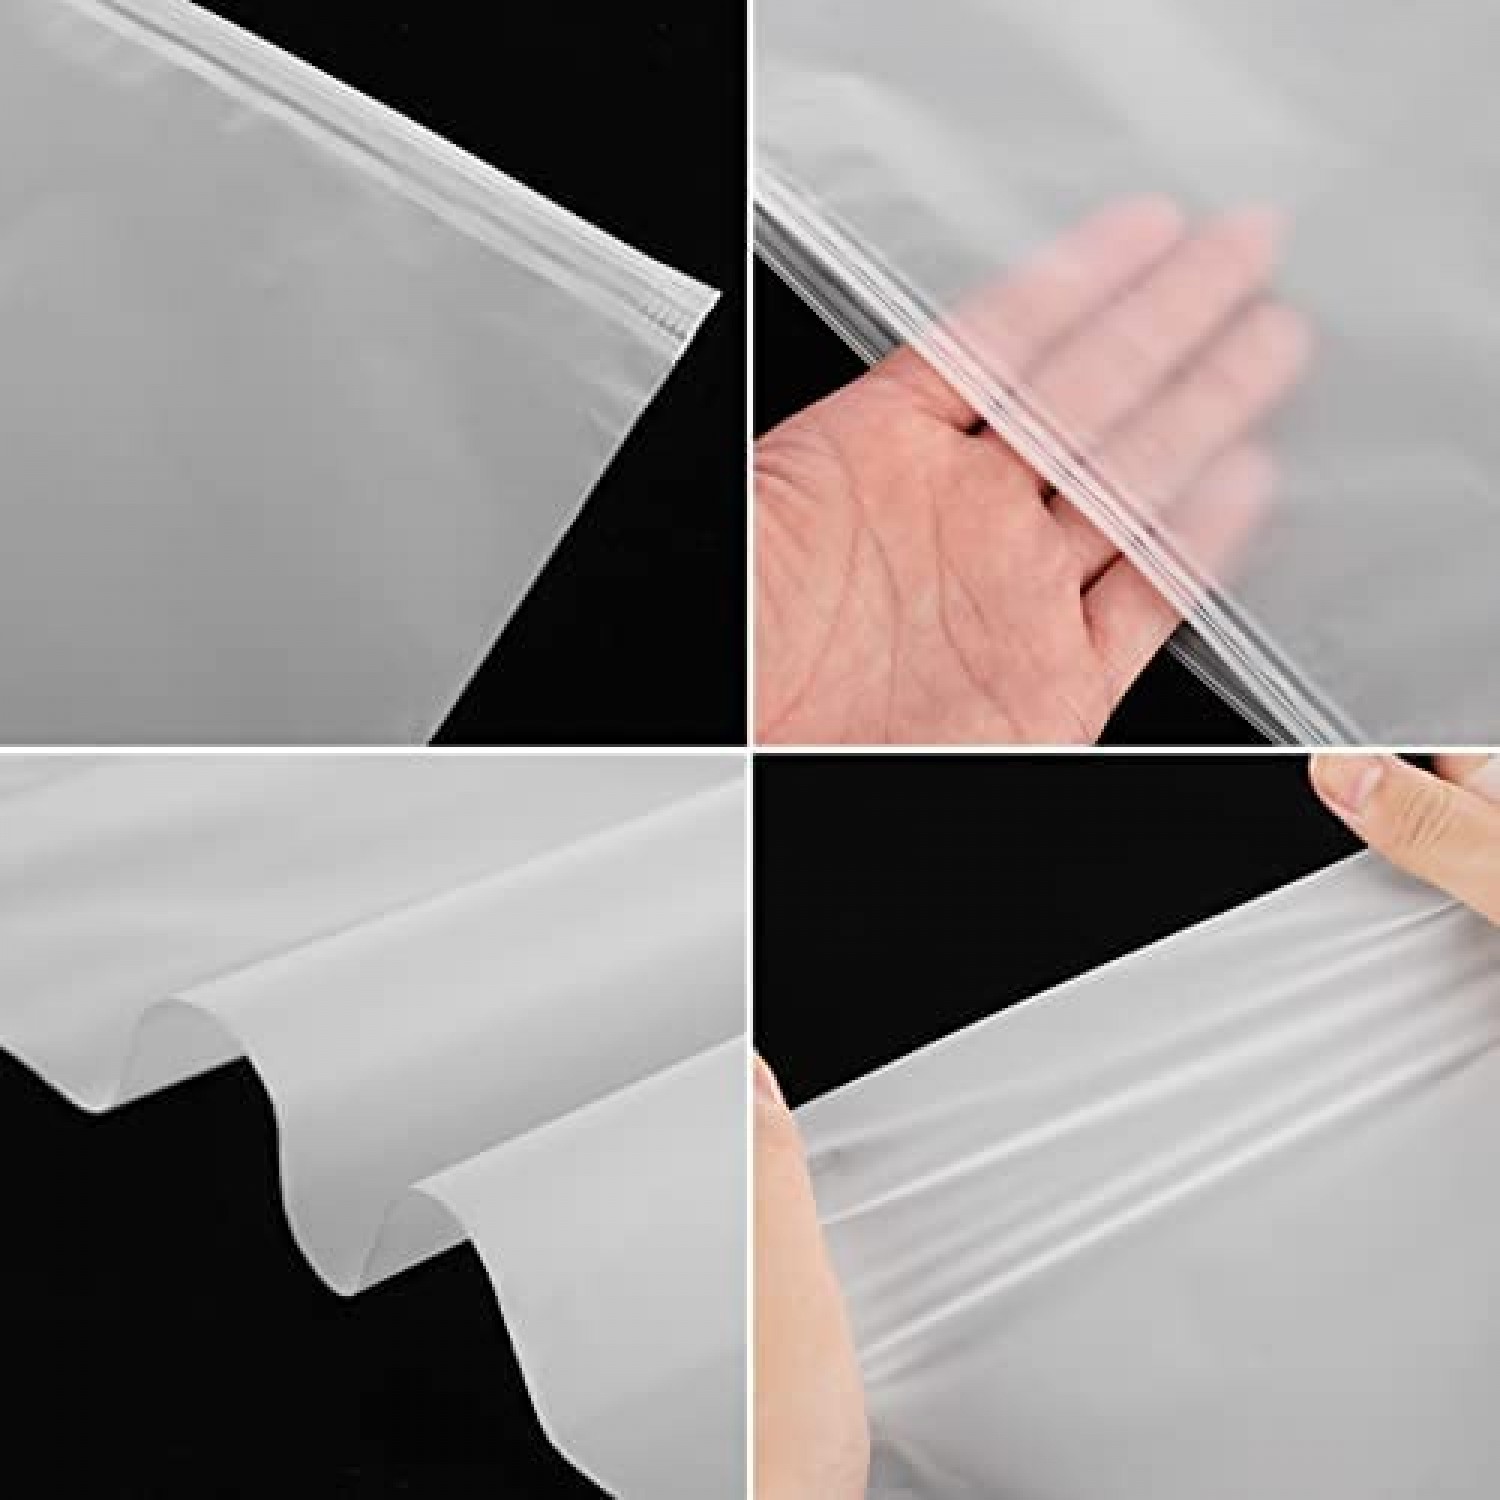 T-shirts Packing Poly Bags Clothes Display Resealable Clear Packing Bags UK